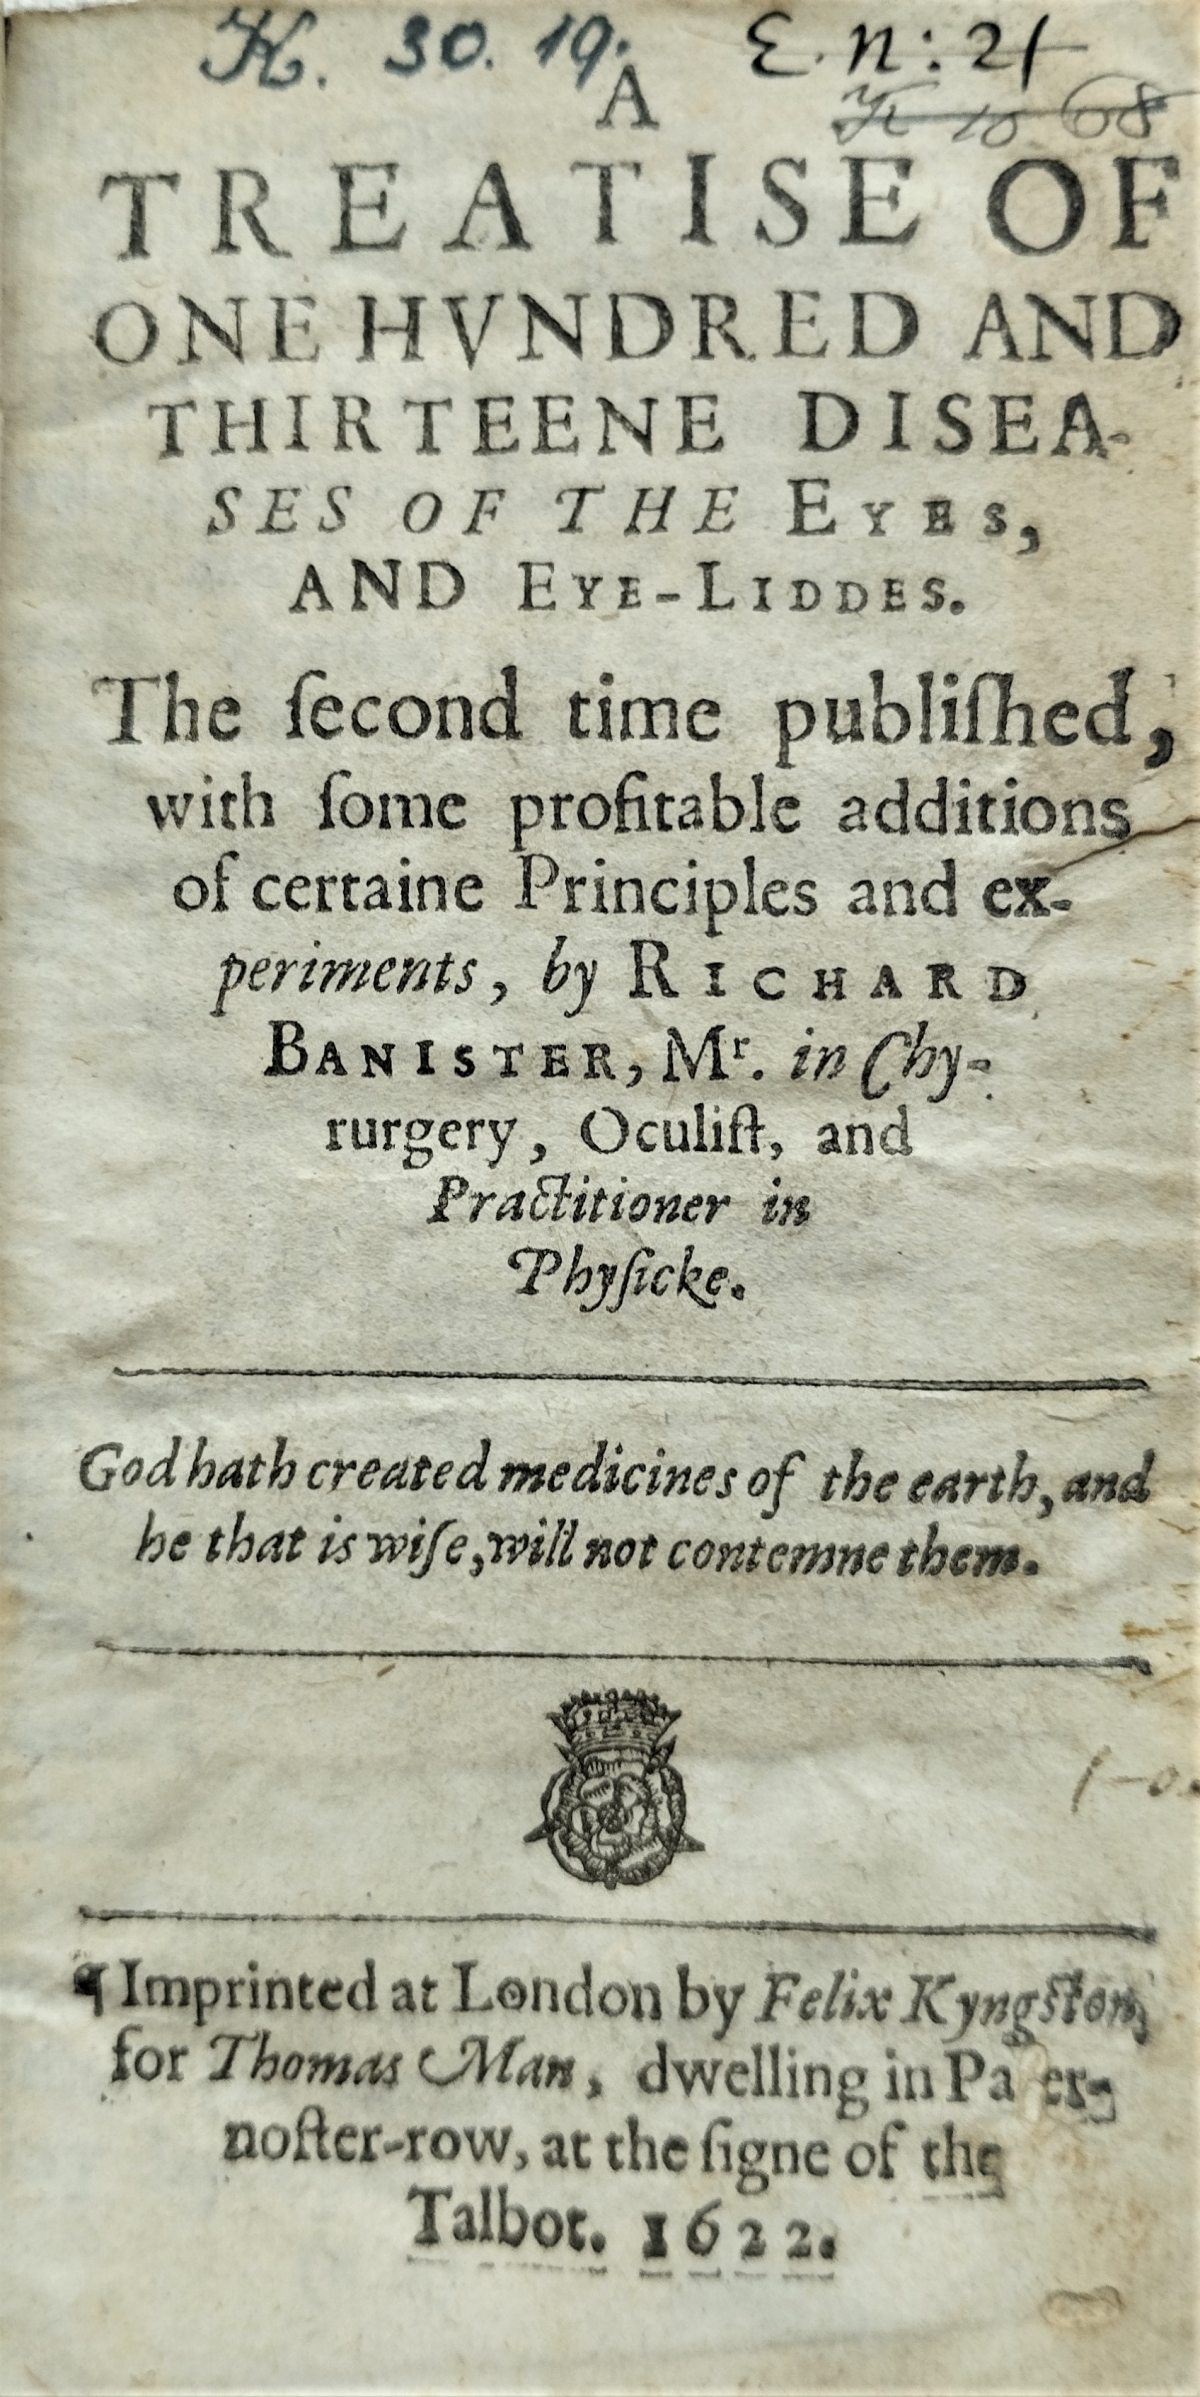 Title page of the book "Treatise of one hundred and thirteen diseases of the eyes" by Richard Banister (1622).